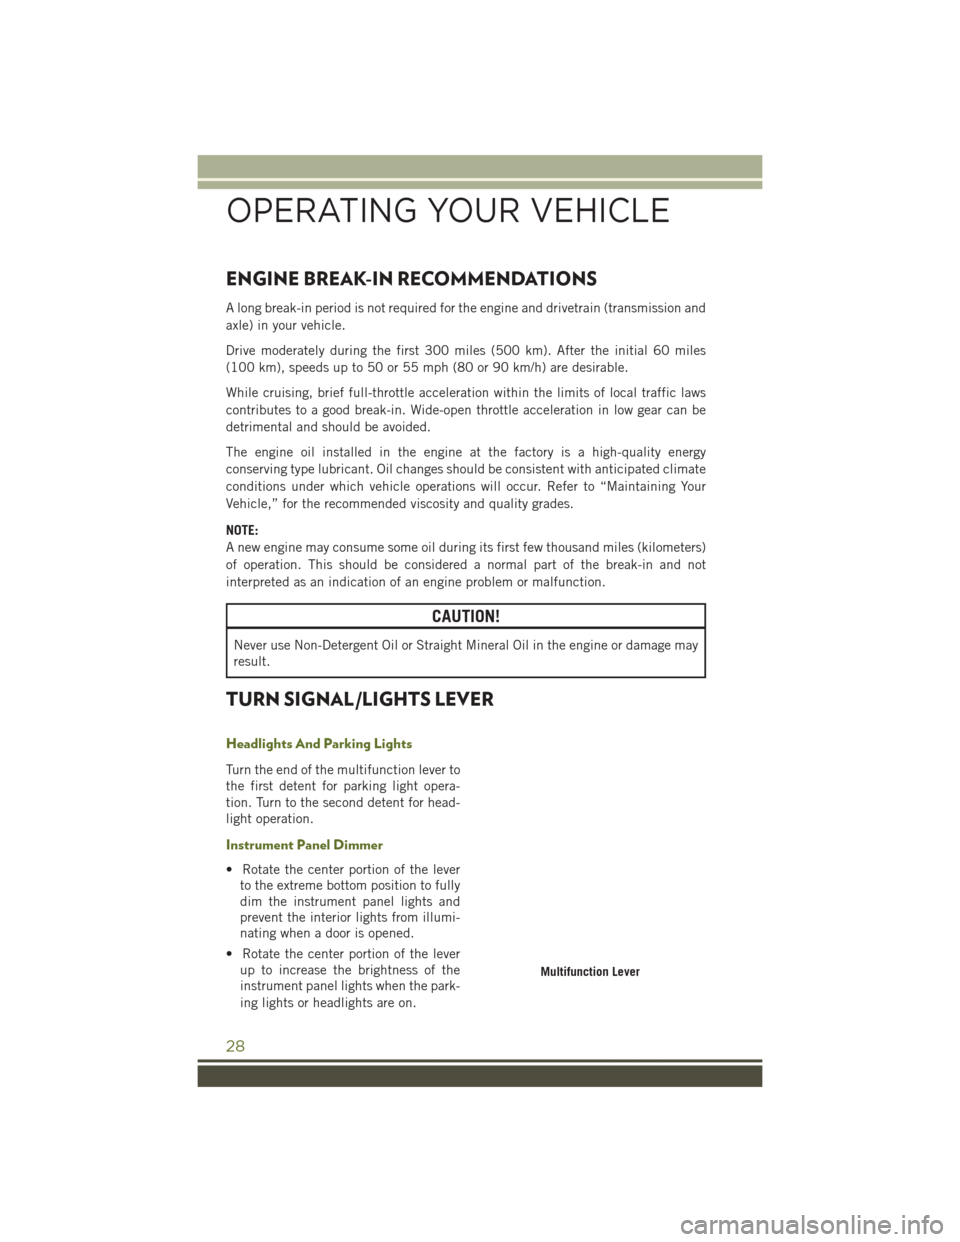 JEEP WRANGLER 2016 JK / 3.G User Guide ENGINE BREAK-IN RECOMMENDATIONS
A long break-in period is not required for the engine and drivetrain (transmission and
axle) in your vehicle.
Drive moderately during the first 300 miles (500 km). Afte